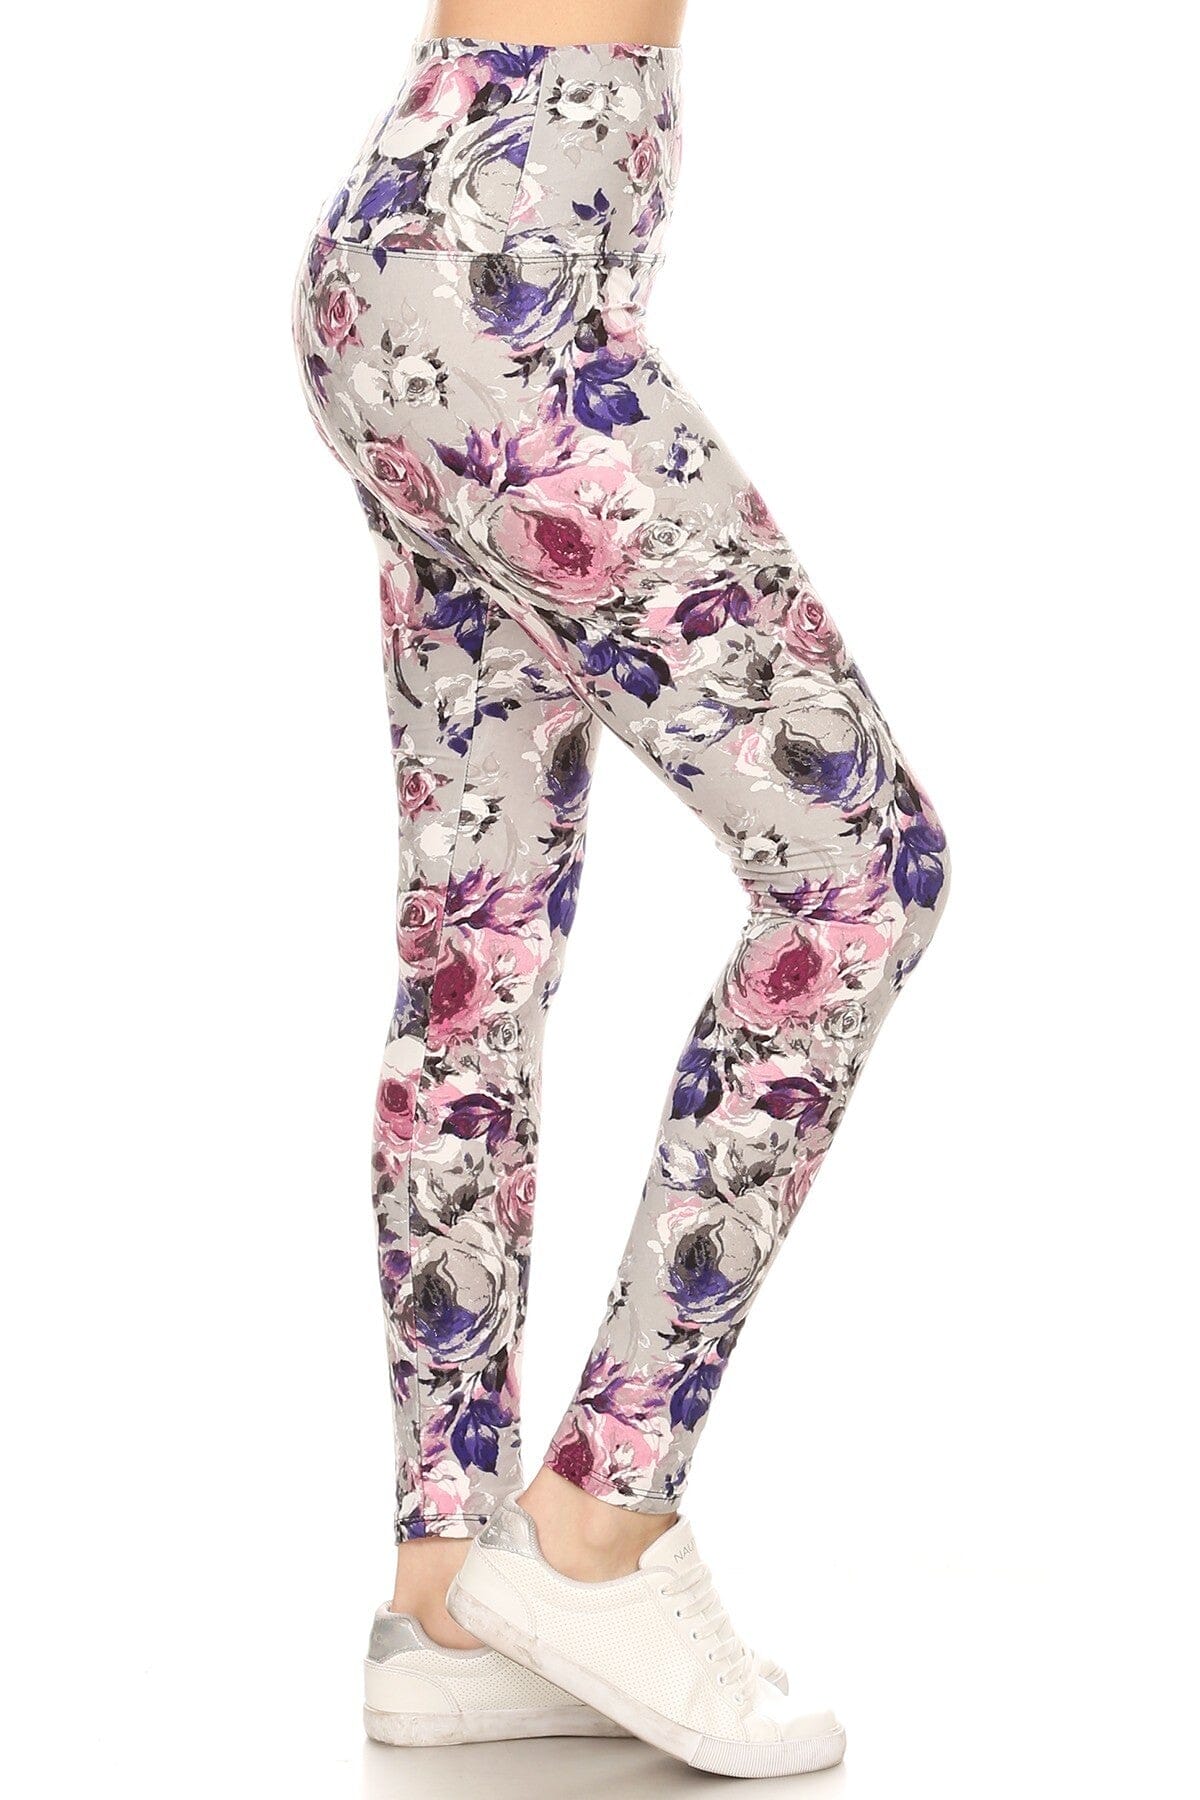 5-inch Long Yoga Style Banded Lined Floral Printed Knit Legging With High Waist_ Bottoms jehouze 